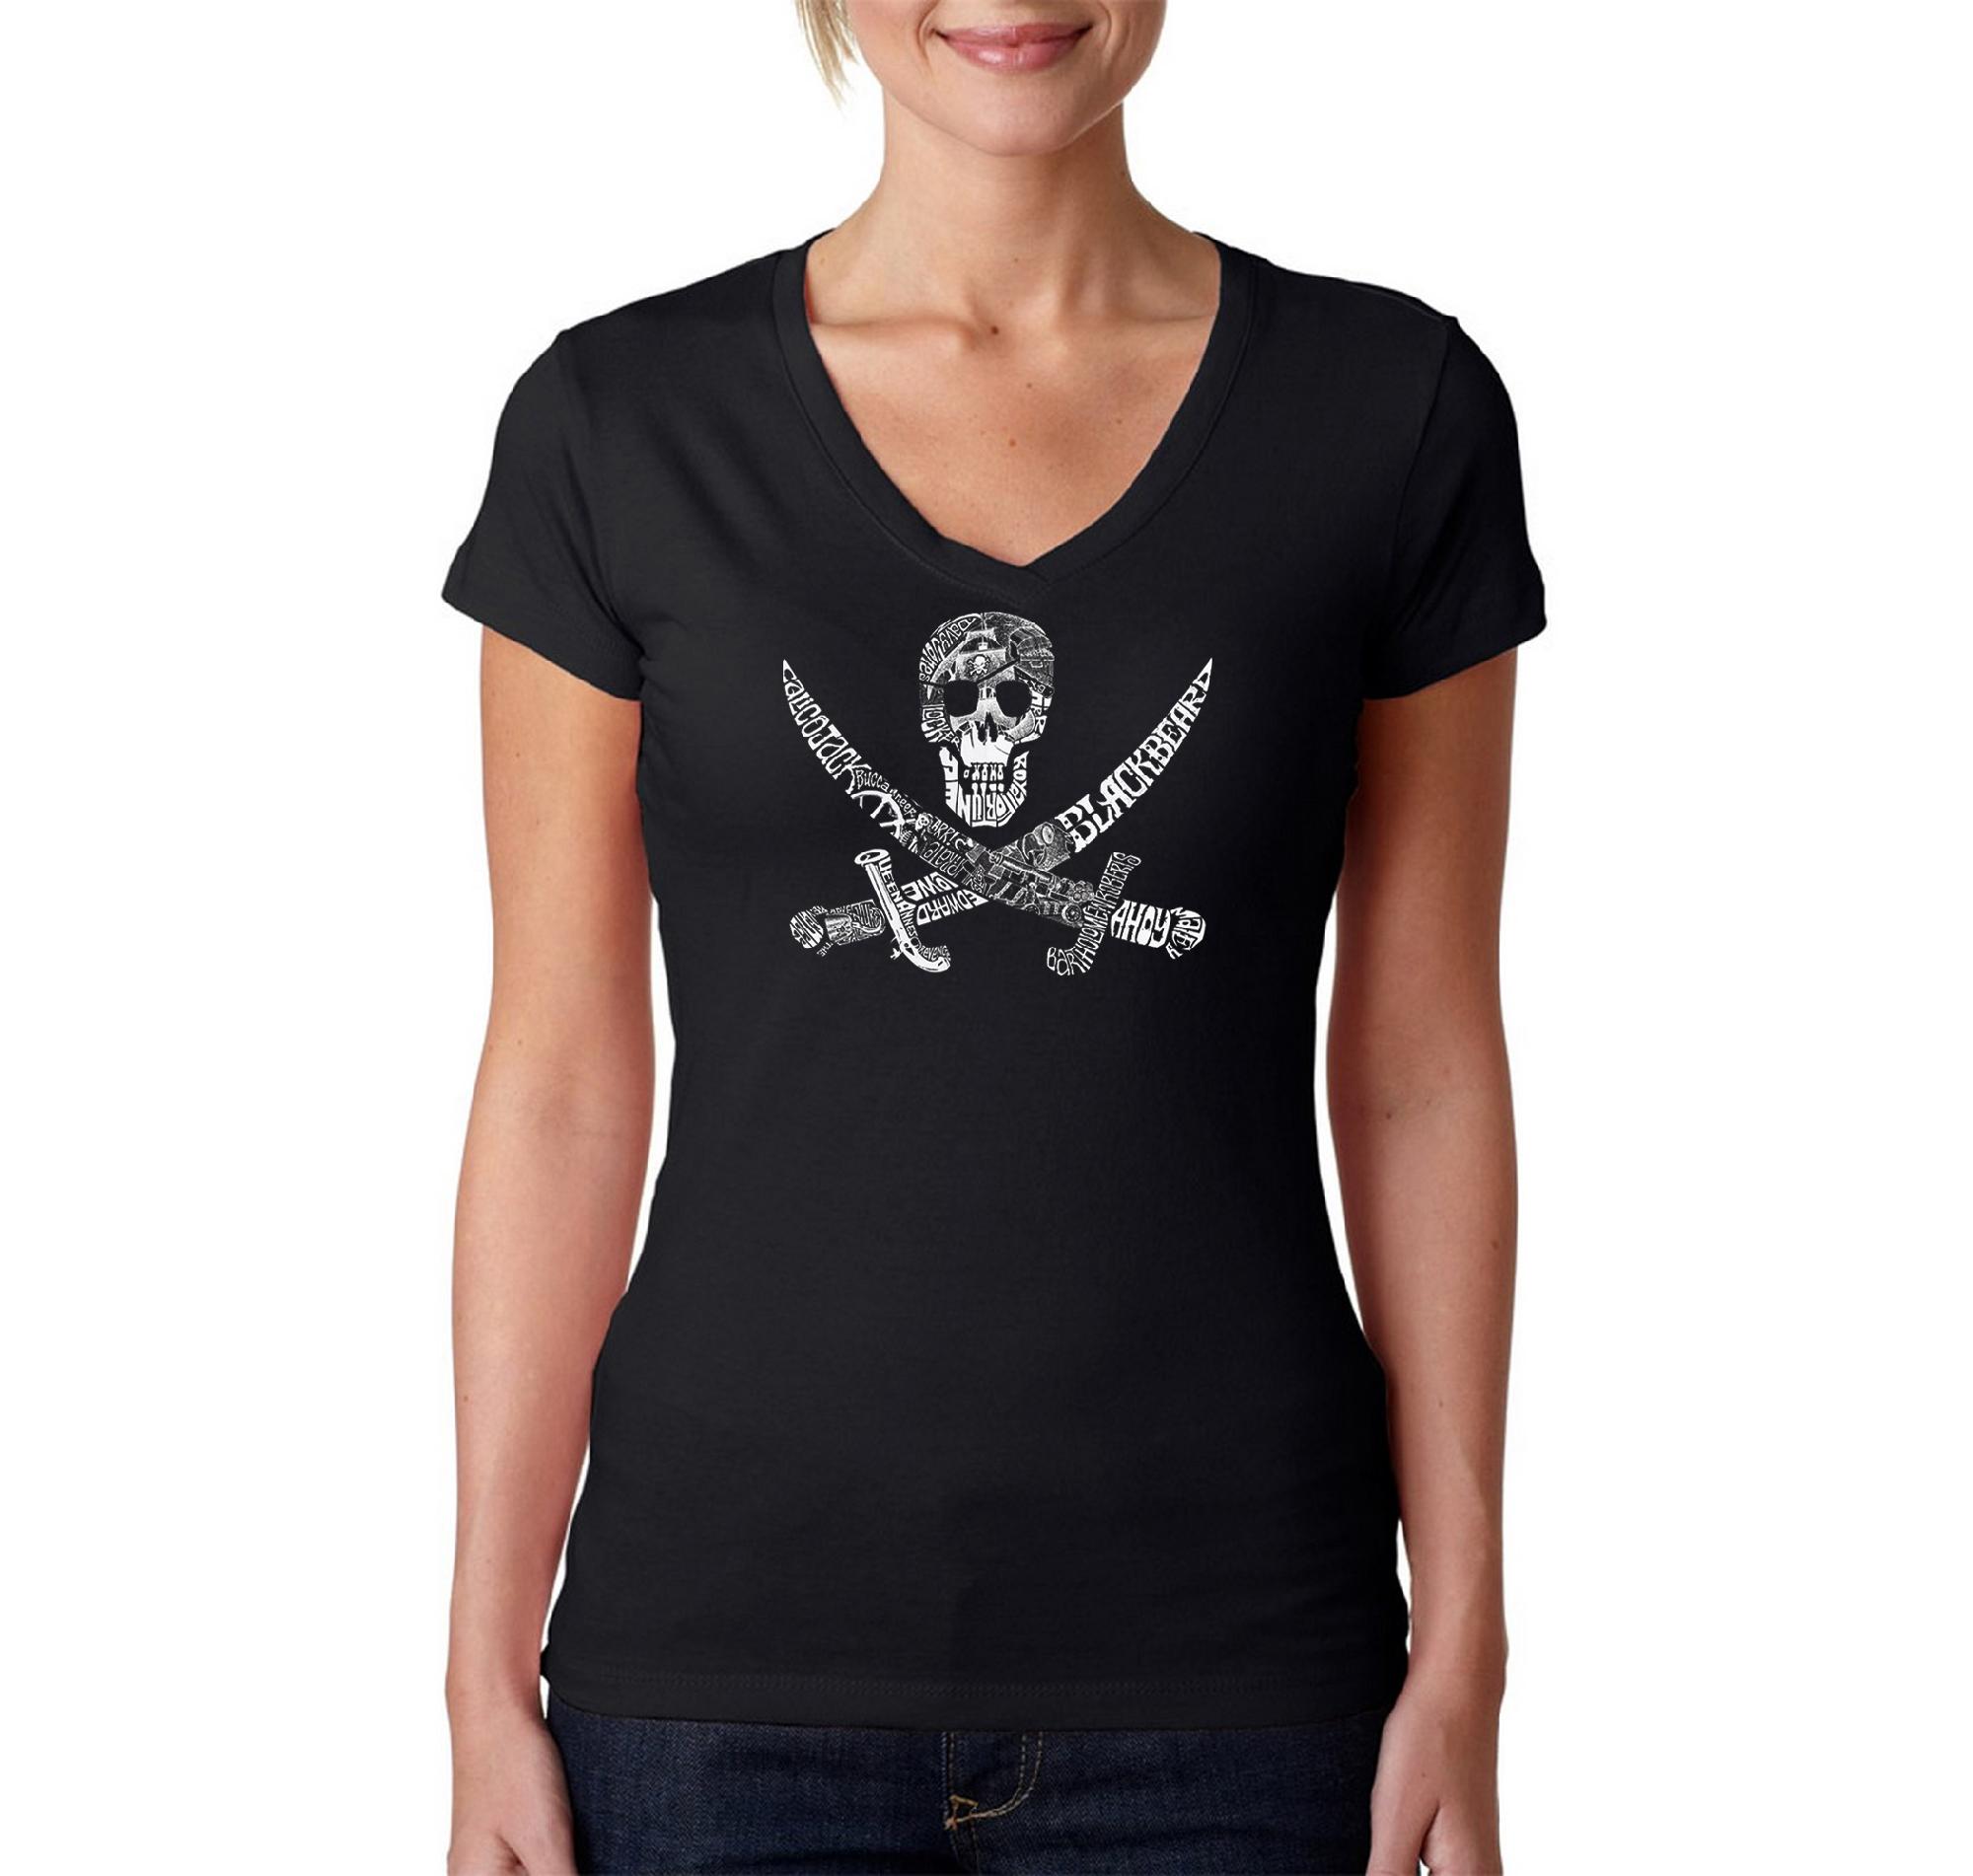 Los Angeles Pop Art Women's Word Art V-Neck T-shirt - Pirate Captains, Ships and Imagery